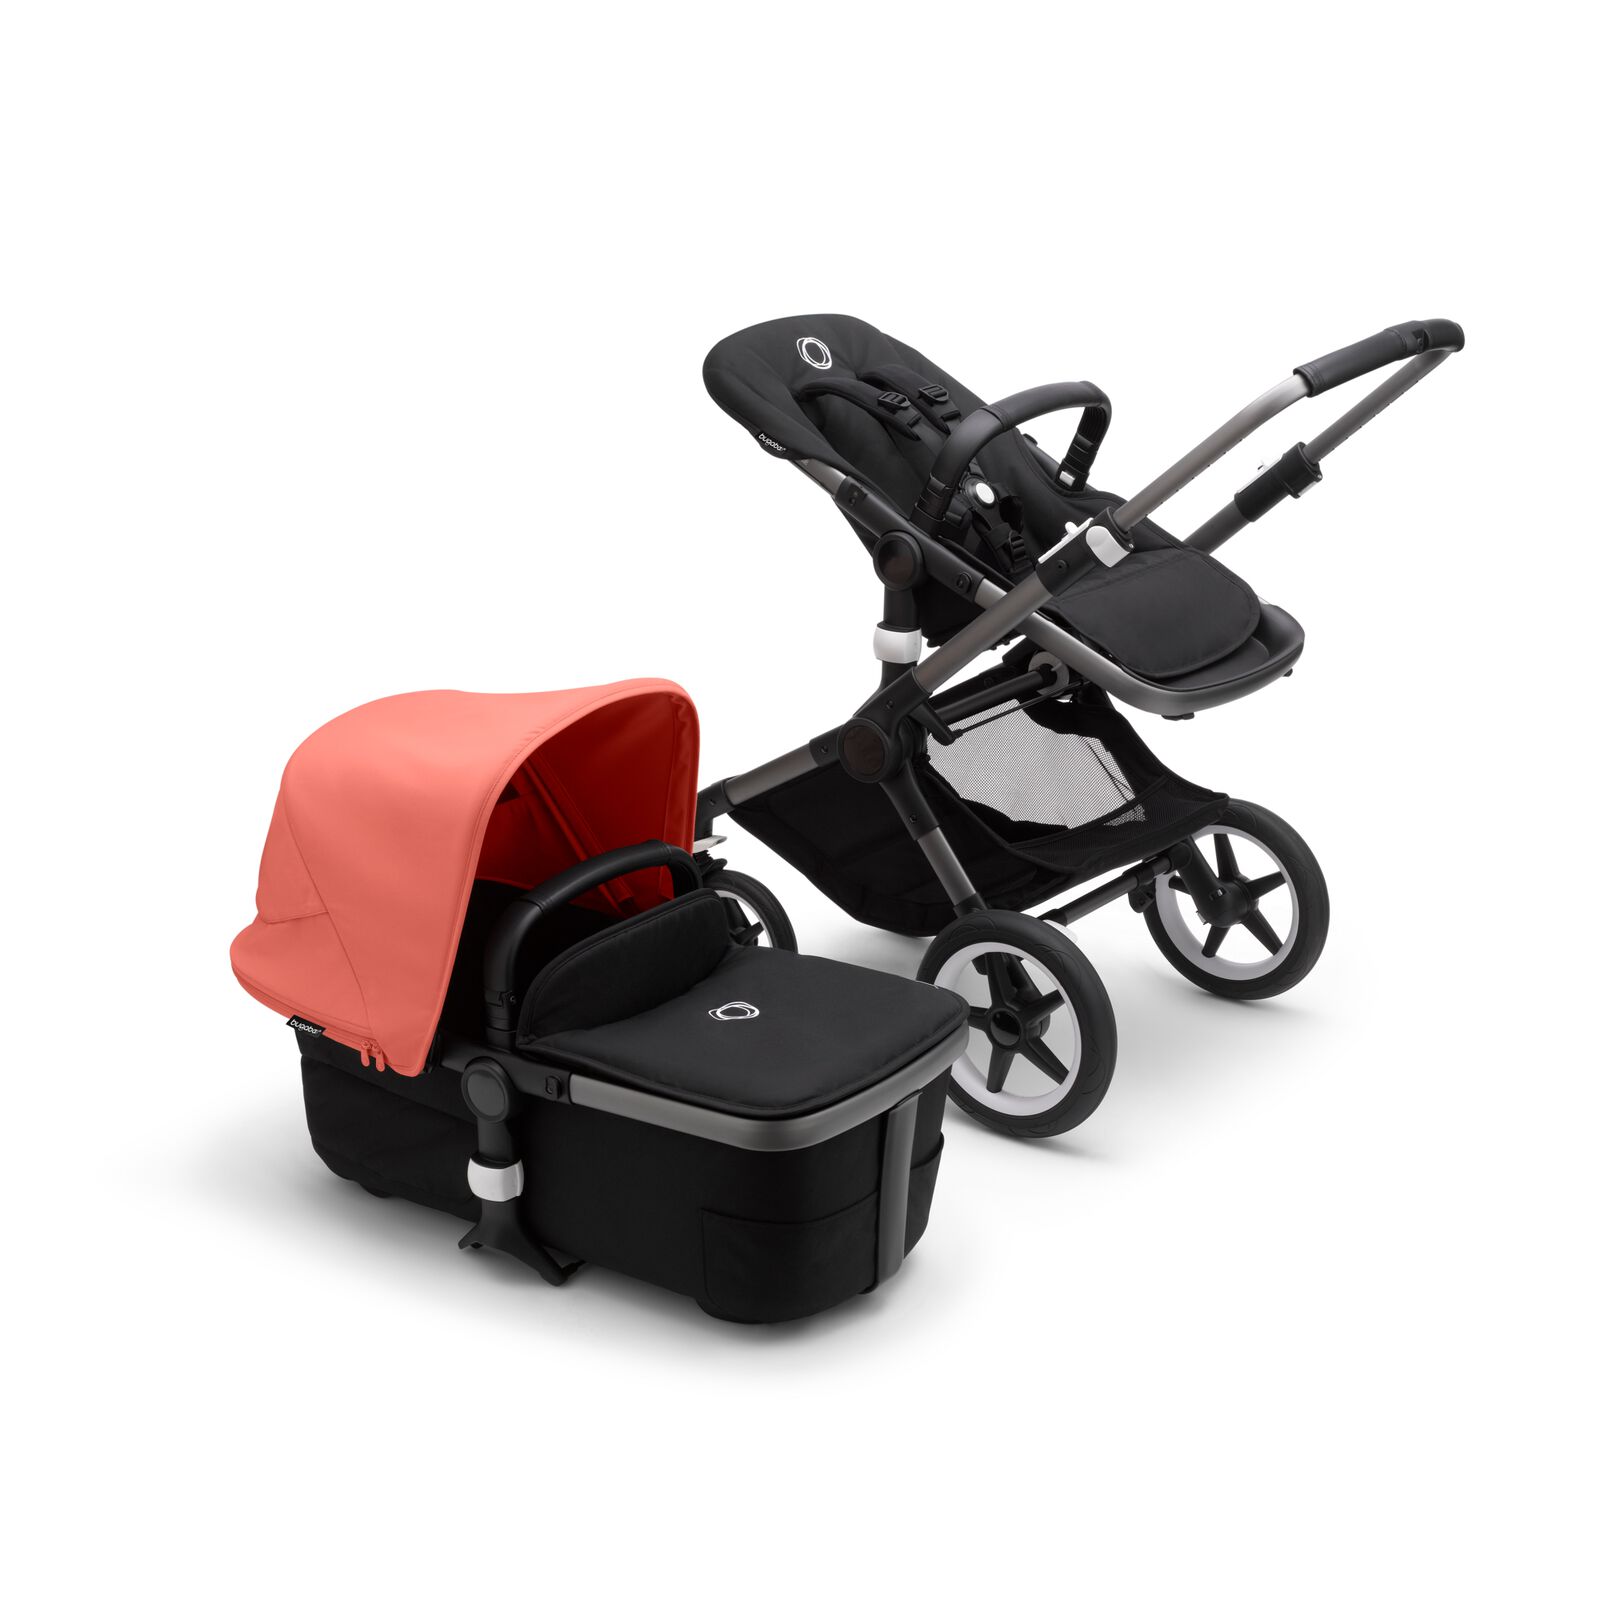 Bugaboo Fox 3 bassinet and seat stroller with graphite frame, black fabrics, and red sun canopy.